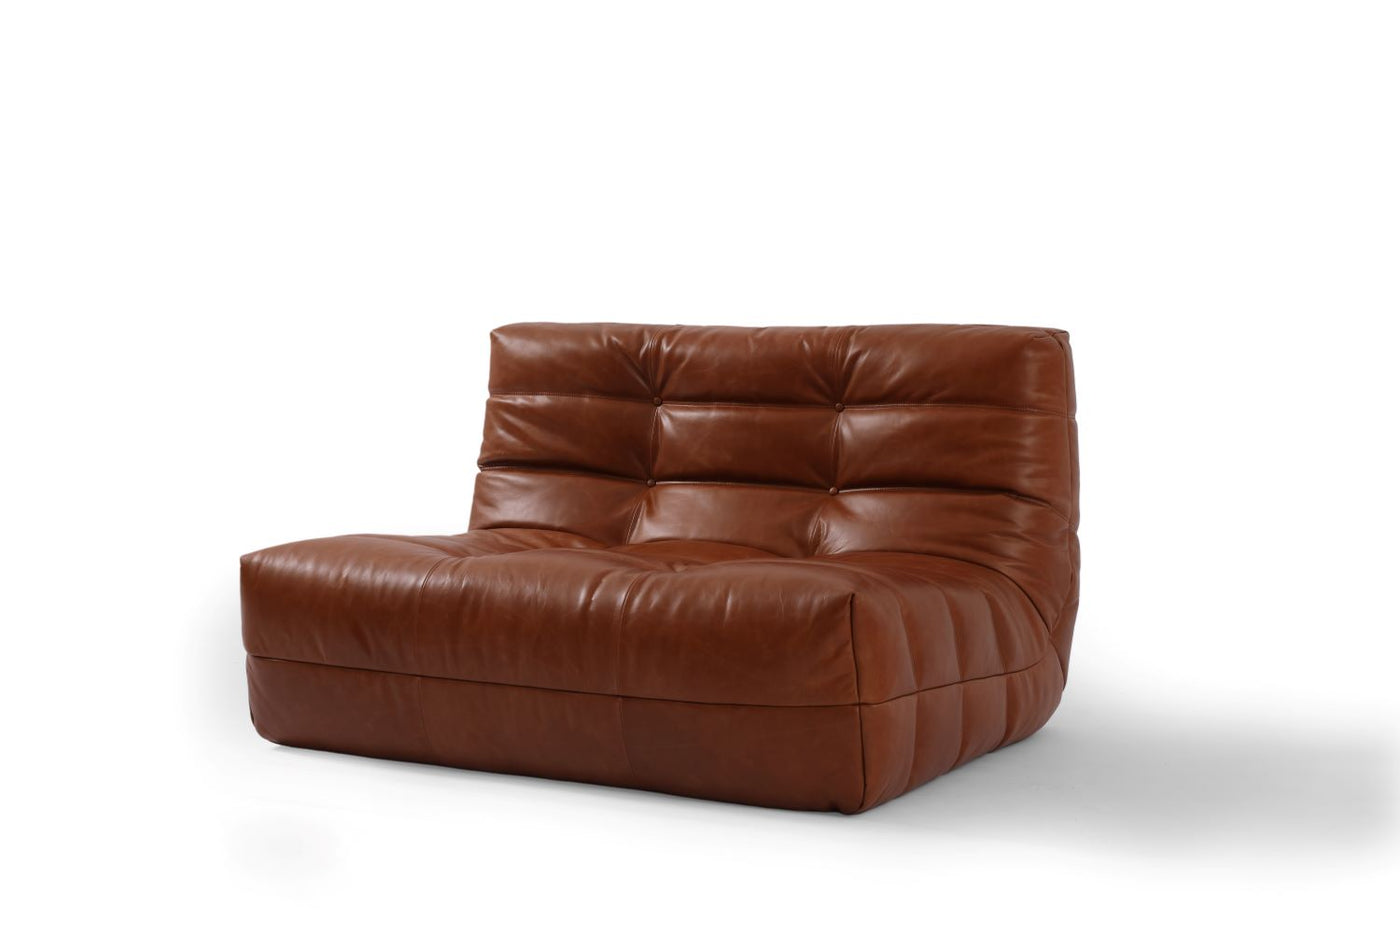 Russo2 Sofa in Soft Vintage leather (3 Piece set)